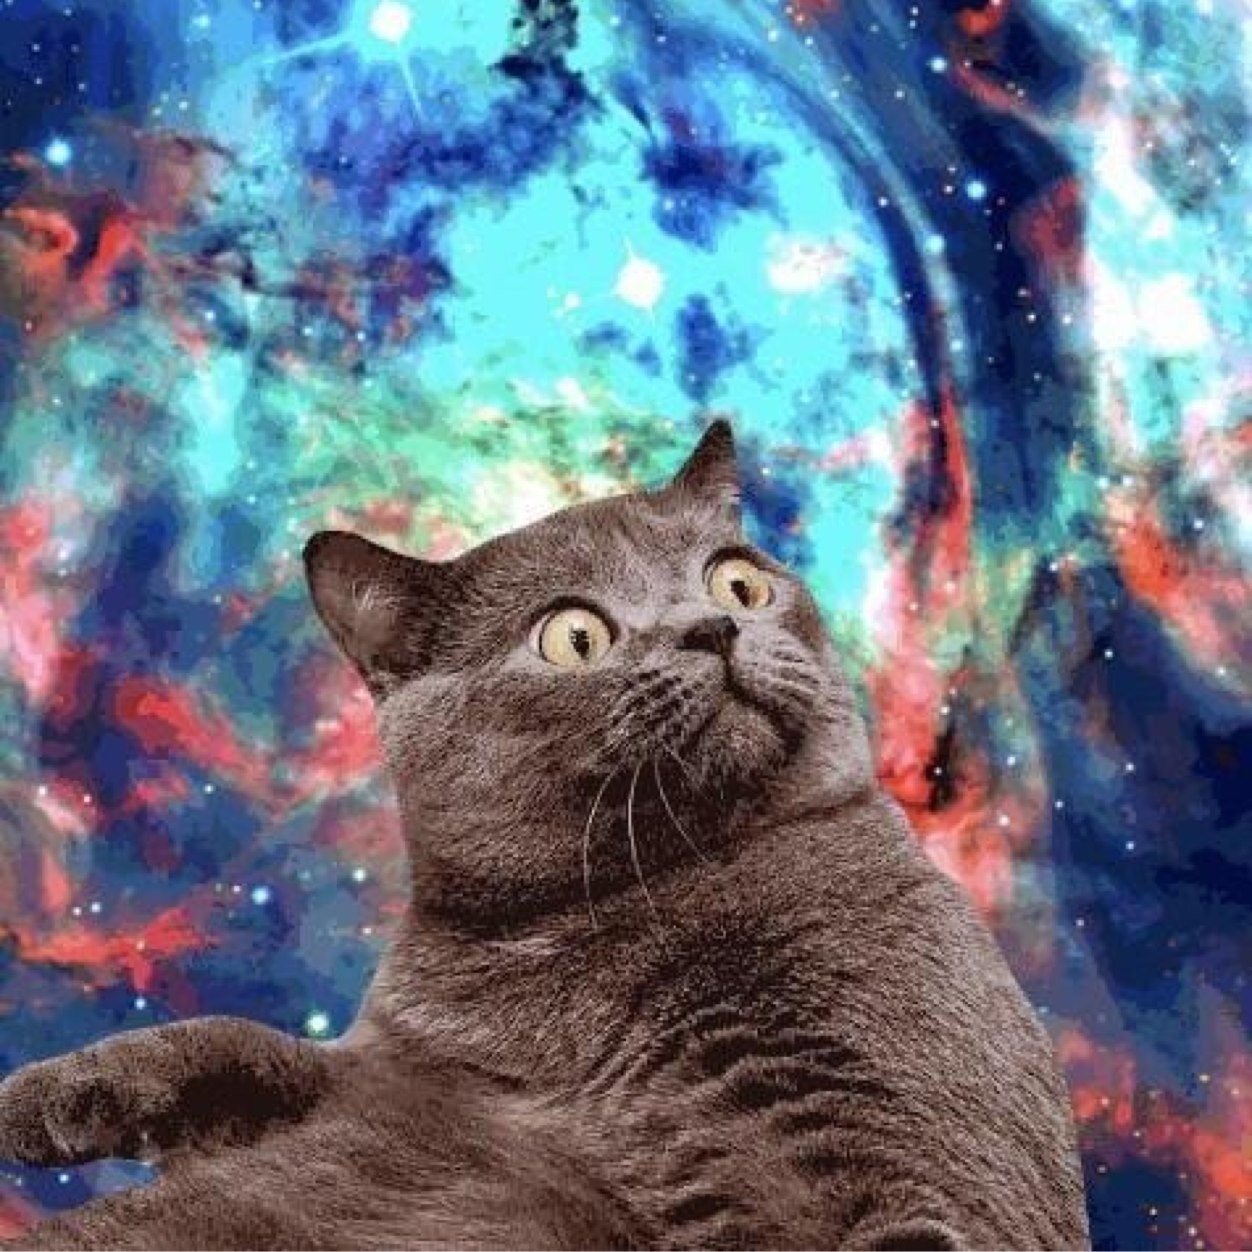 Space Cats ItsSpaceCats